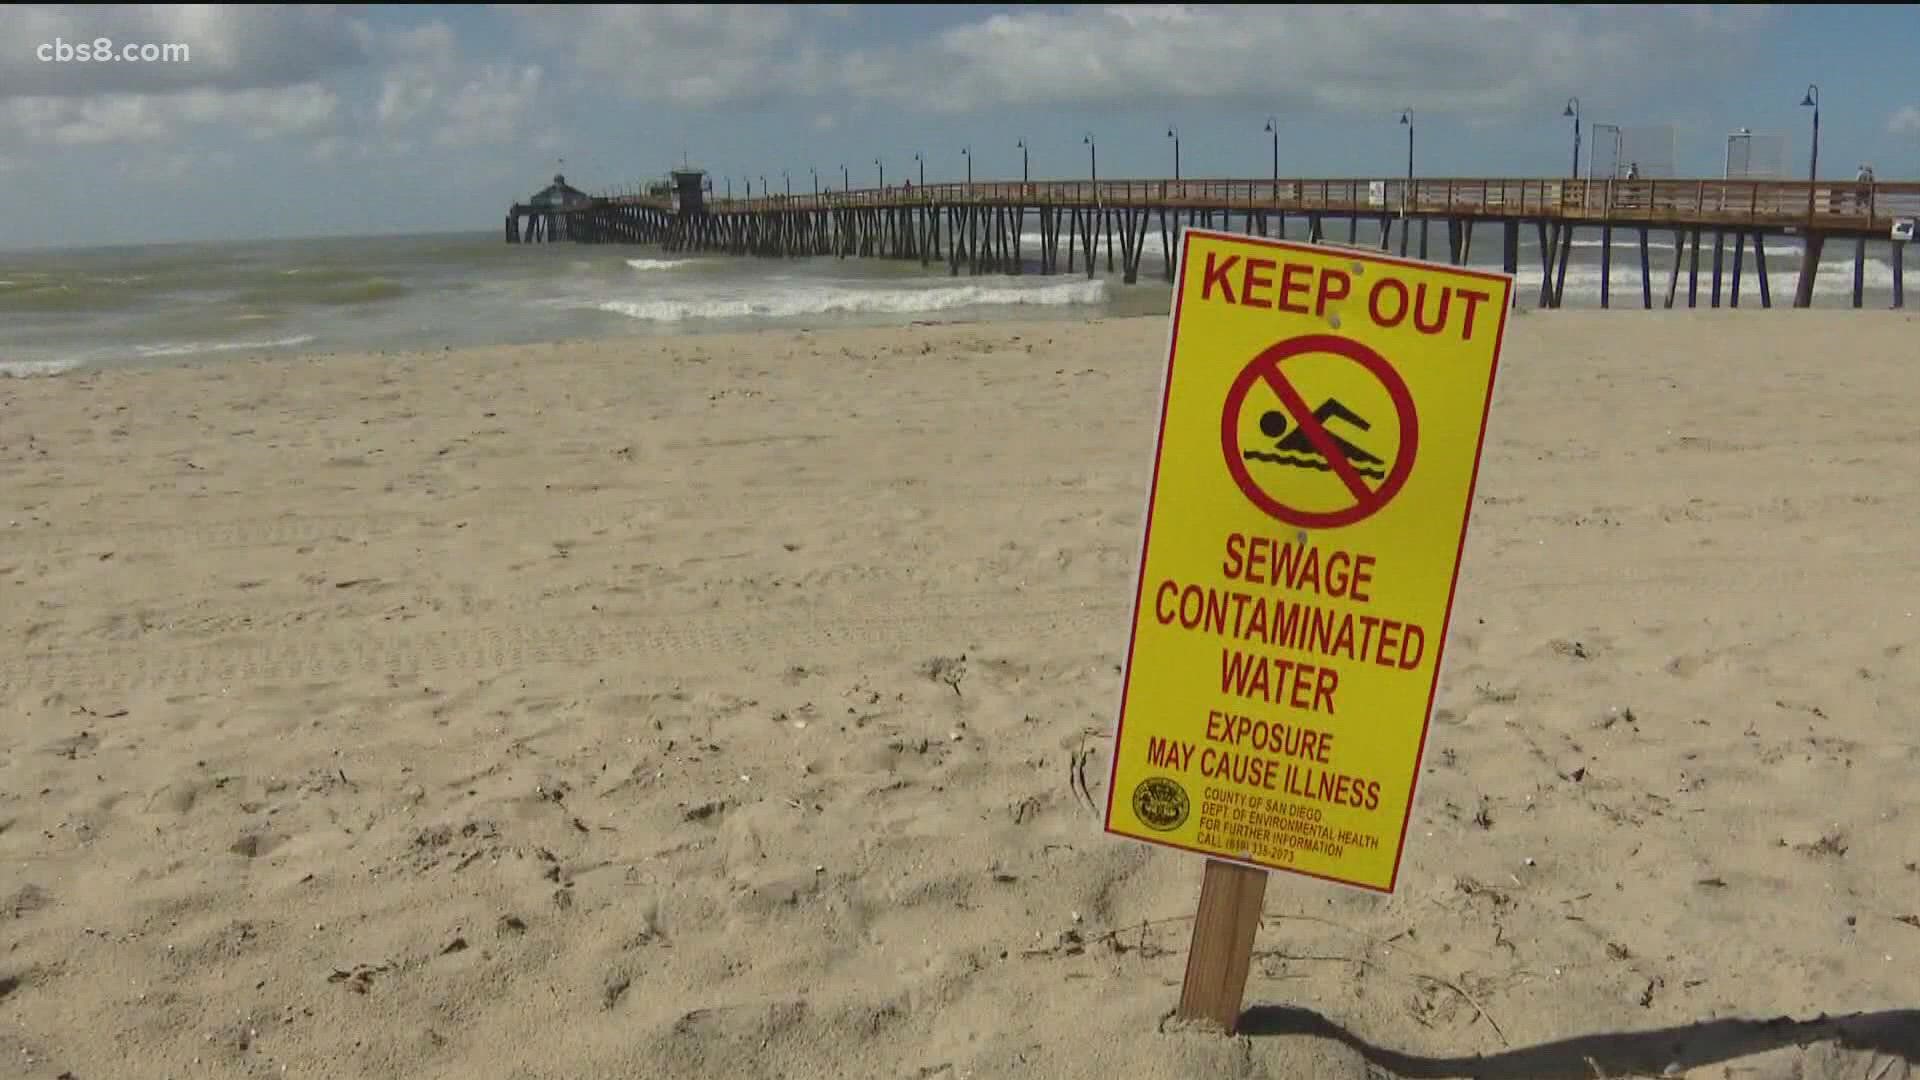 The project would include installing a pump system into the Tijuana River to suck out polluted water before it makes it to the United States coast.